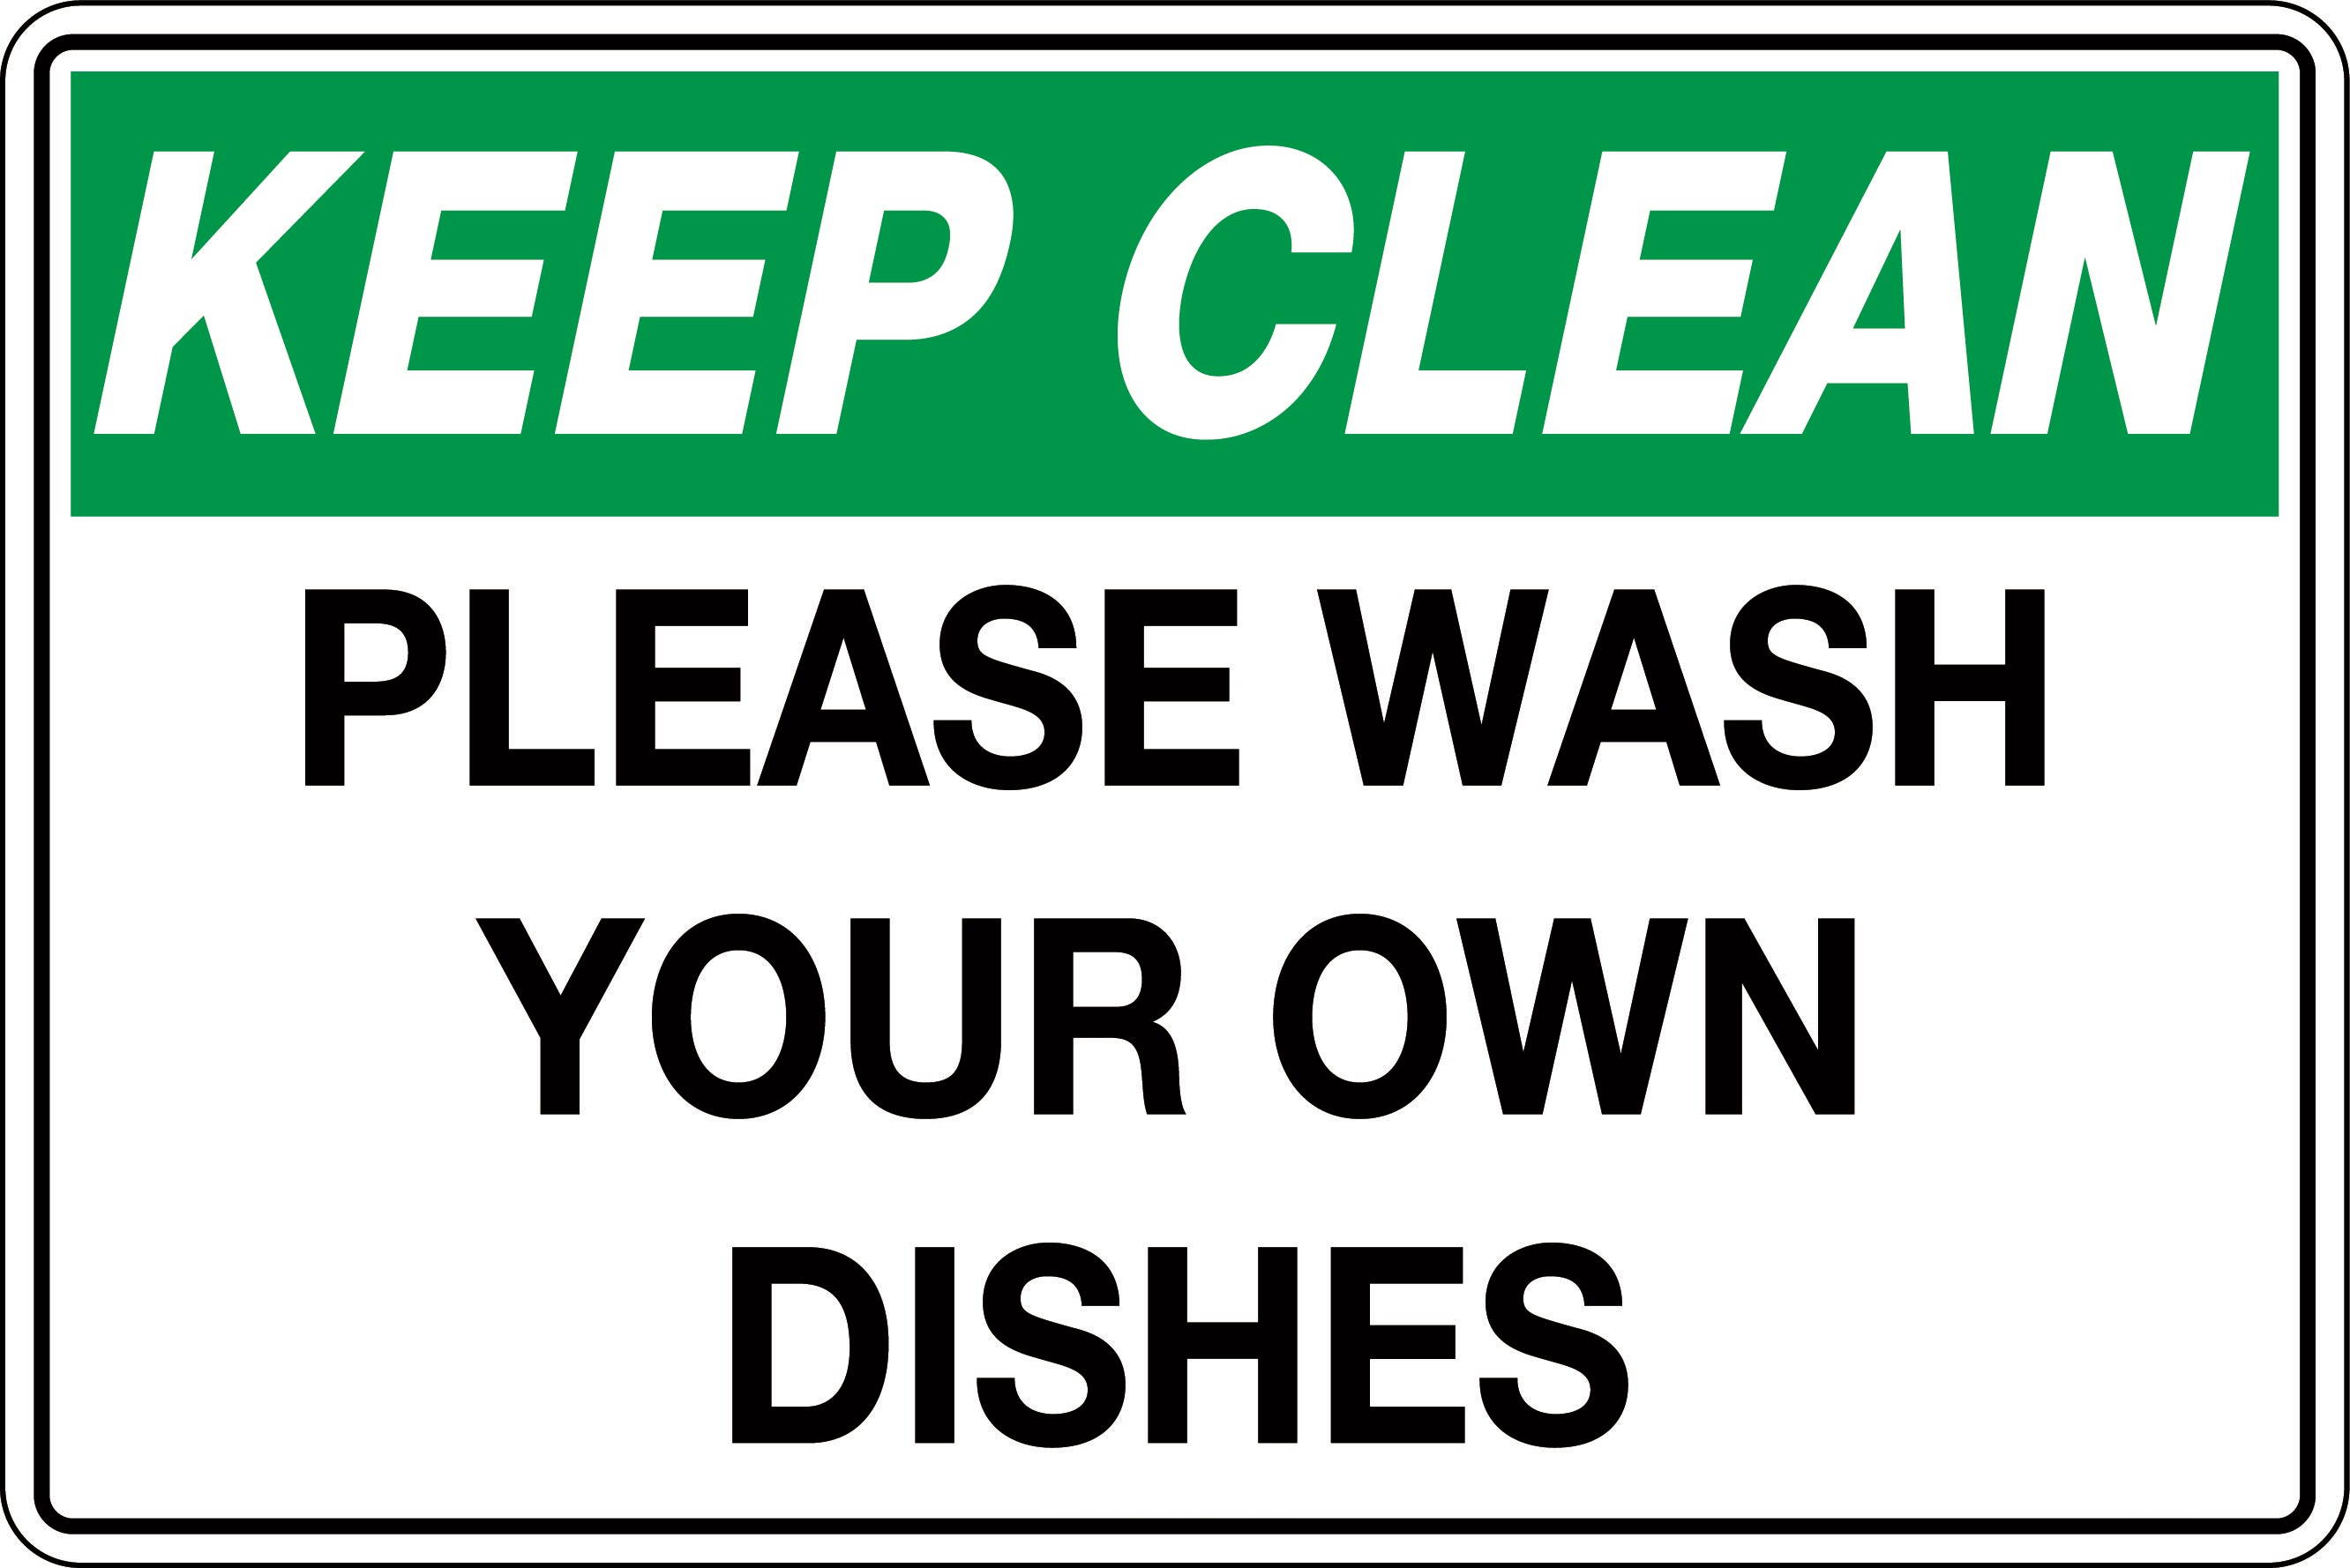 no washing dishes in the bathroom sink